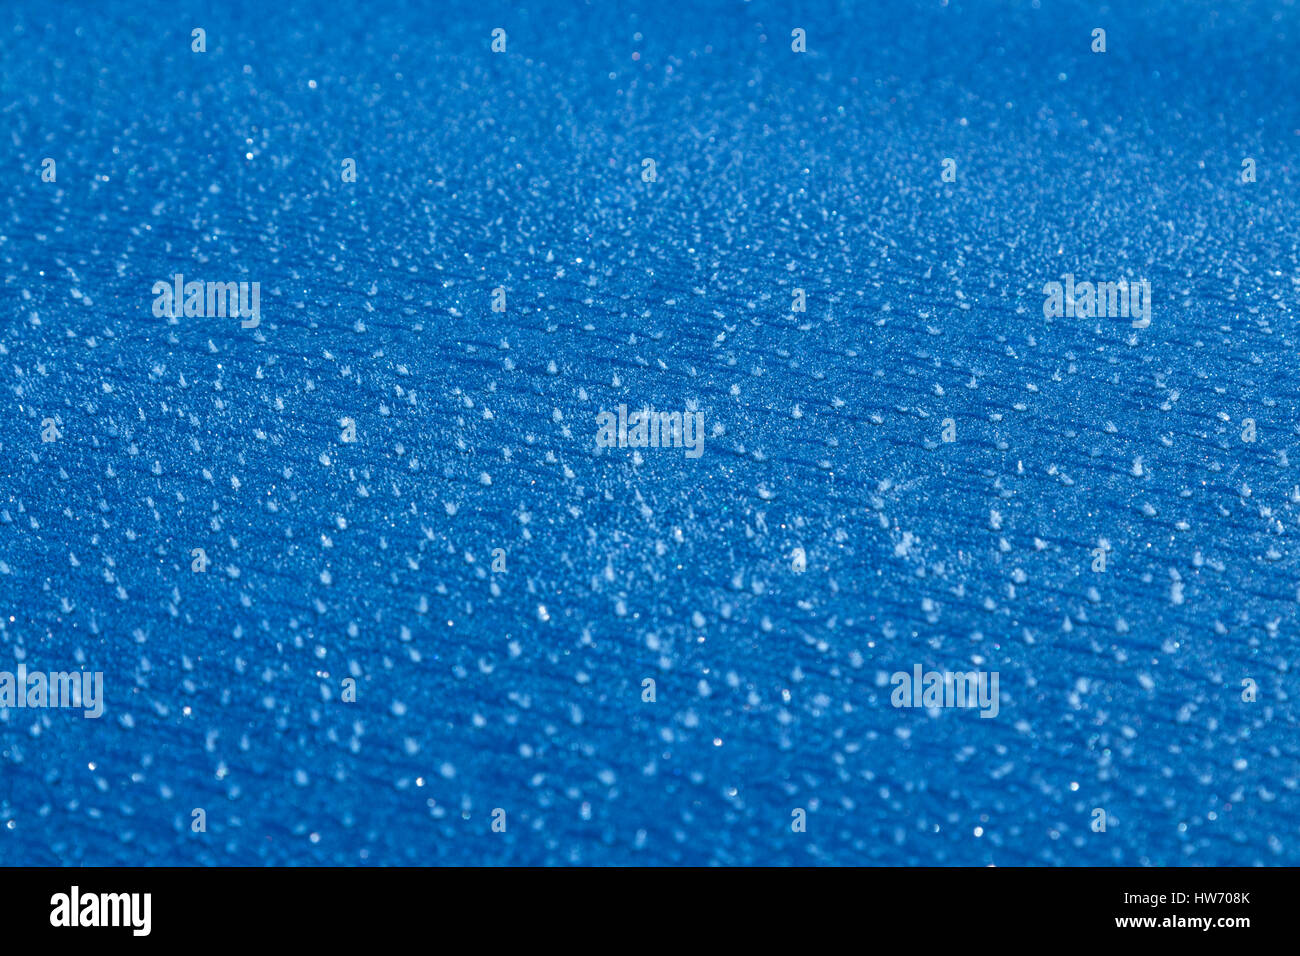 Ice up surface with a blue color to it. Stock Photo